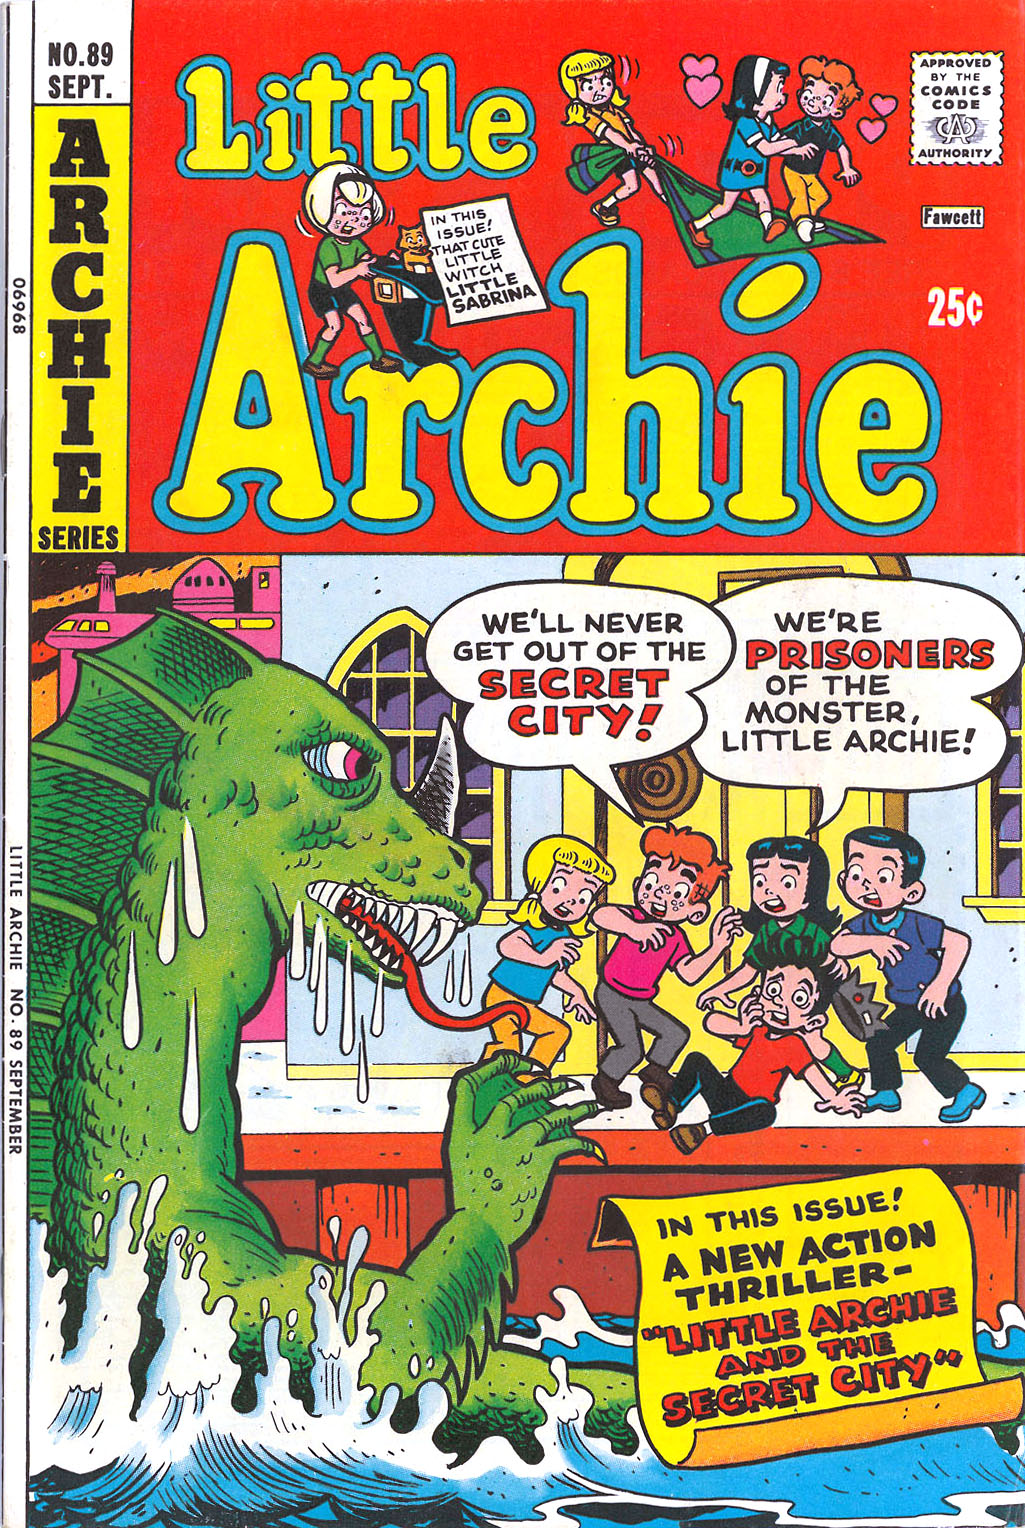 Read online The Adventures of Little Archie comic -  Issue #89 - 1